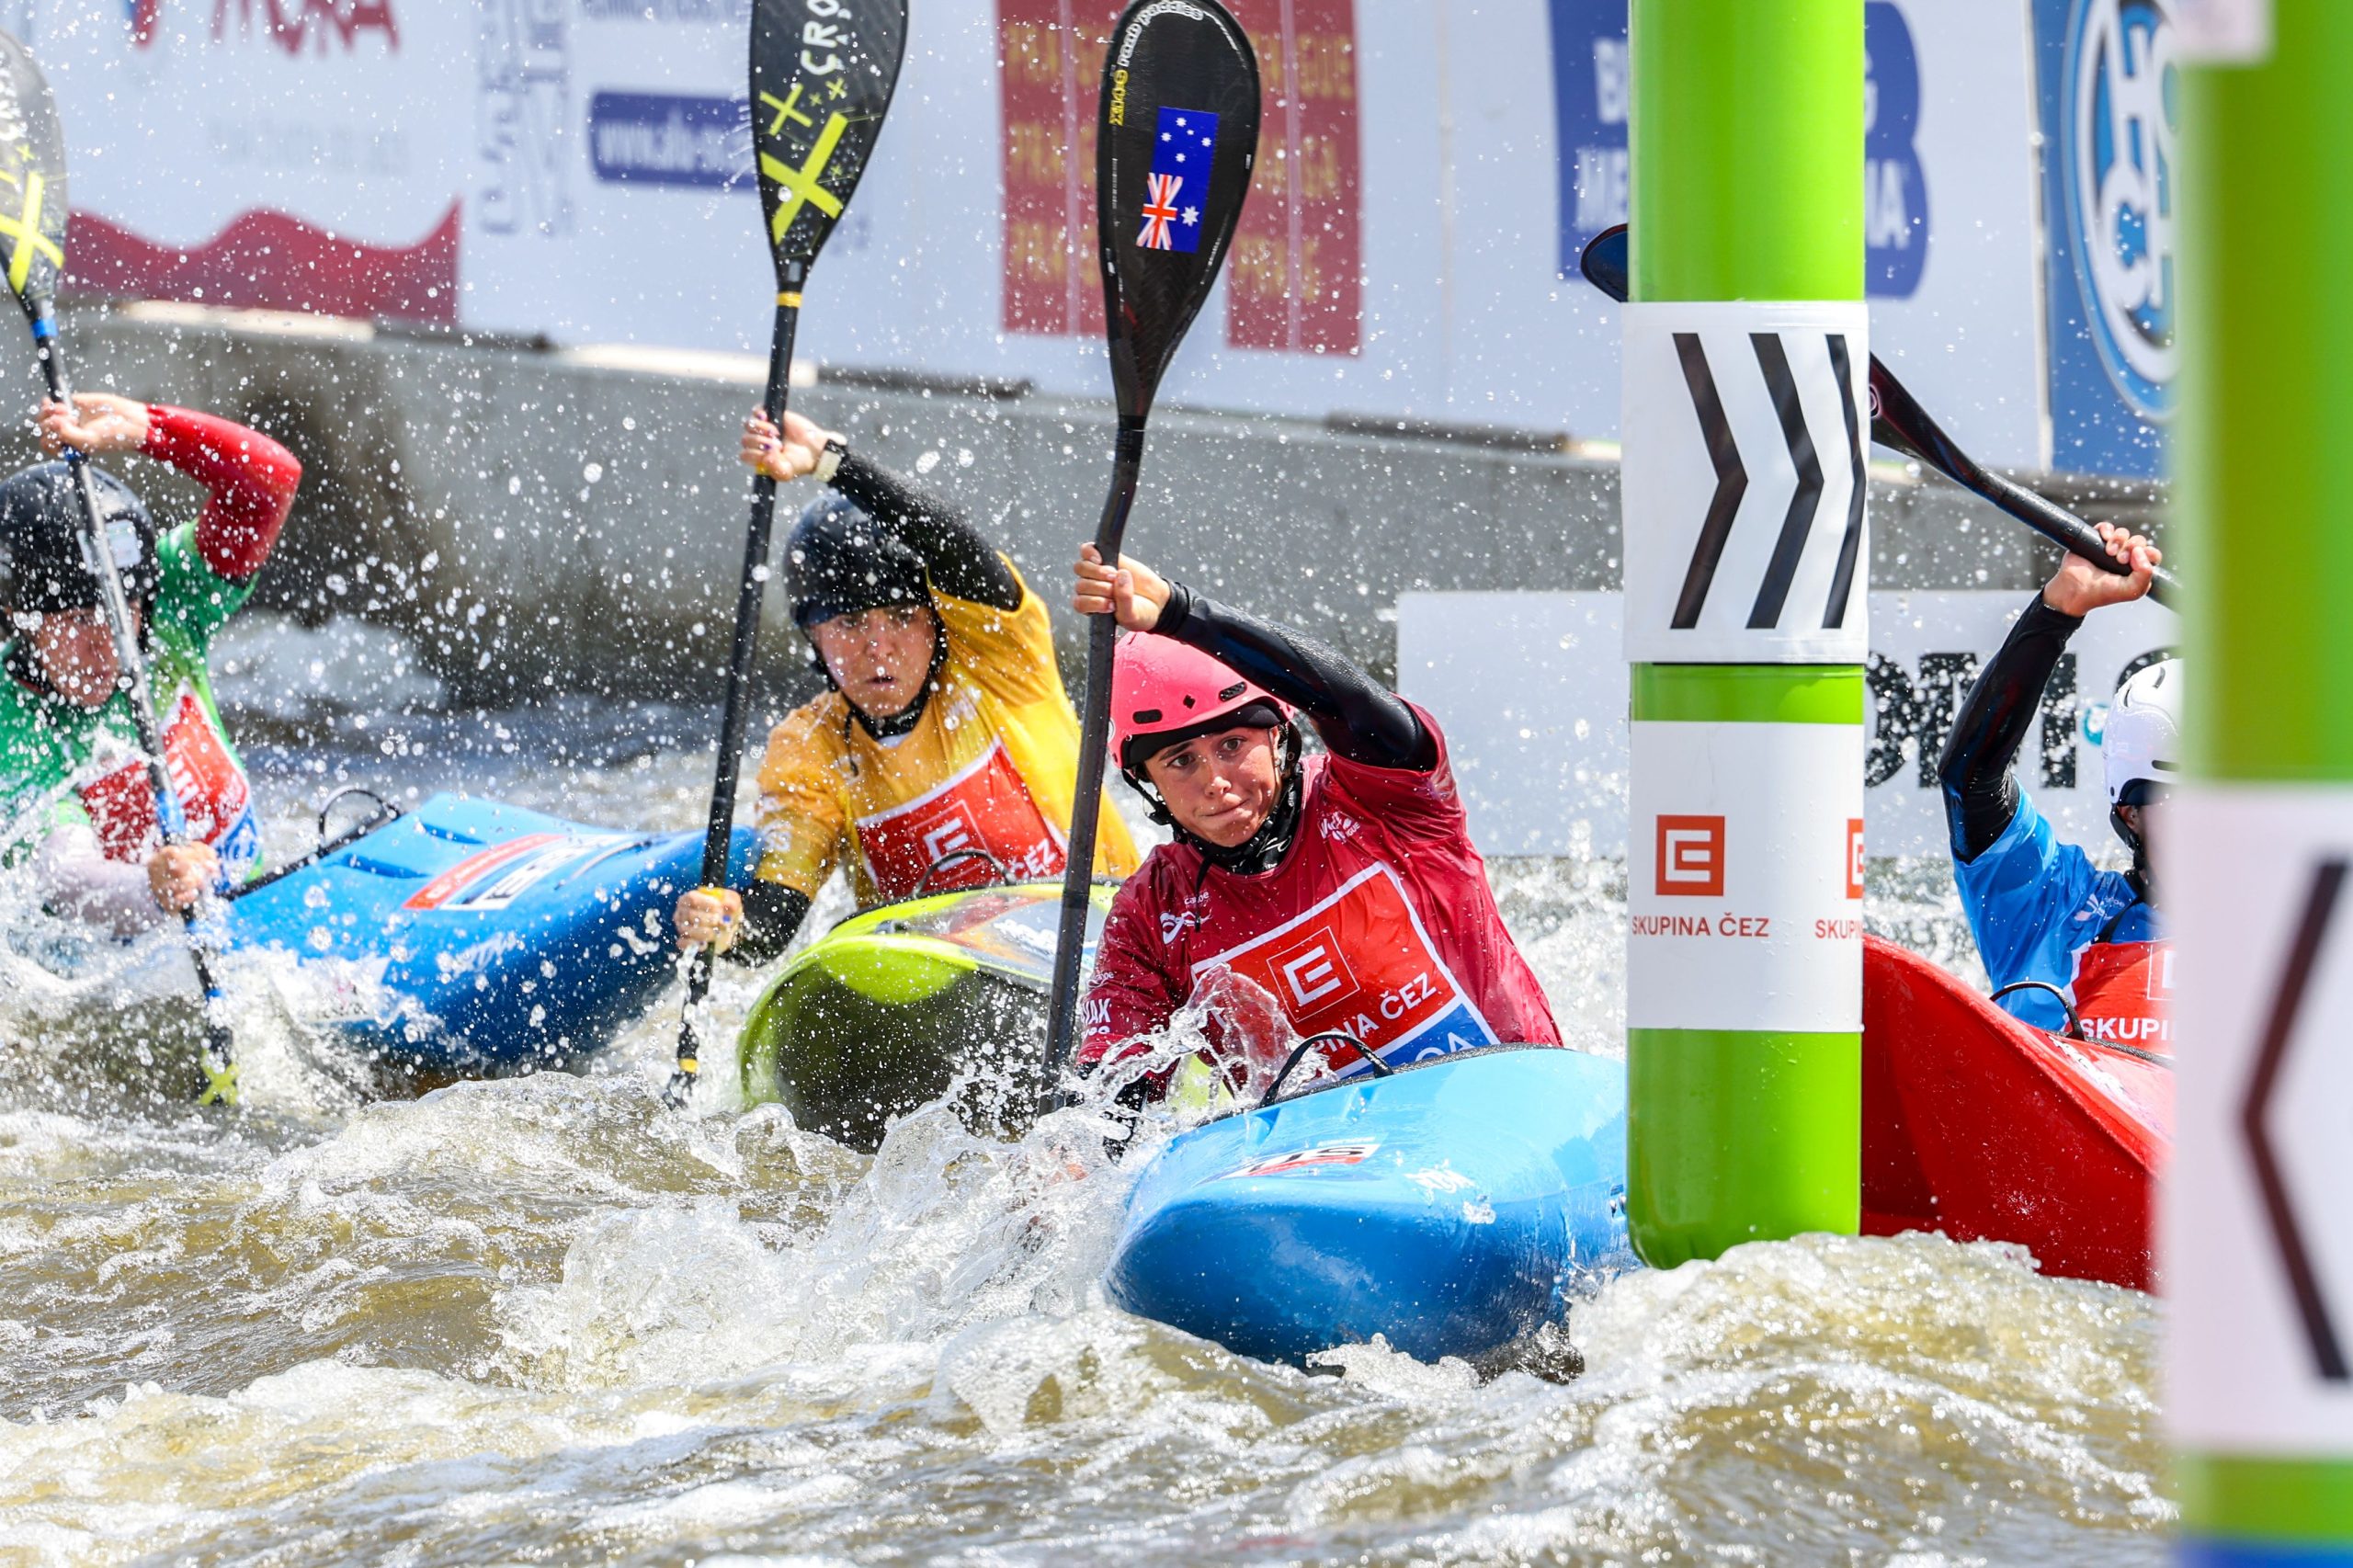 Noemie Fox contests the women's kayak cross at the World Cup in Prague and qualifies an Olympic quota place.